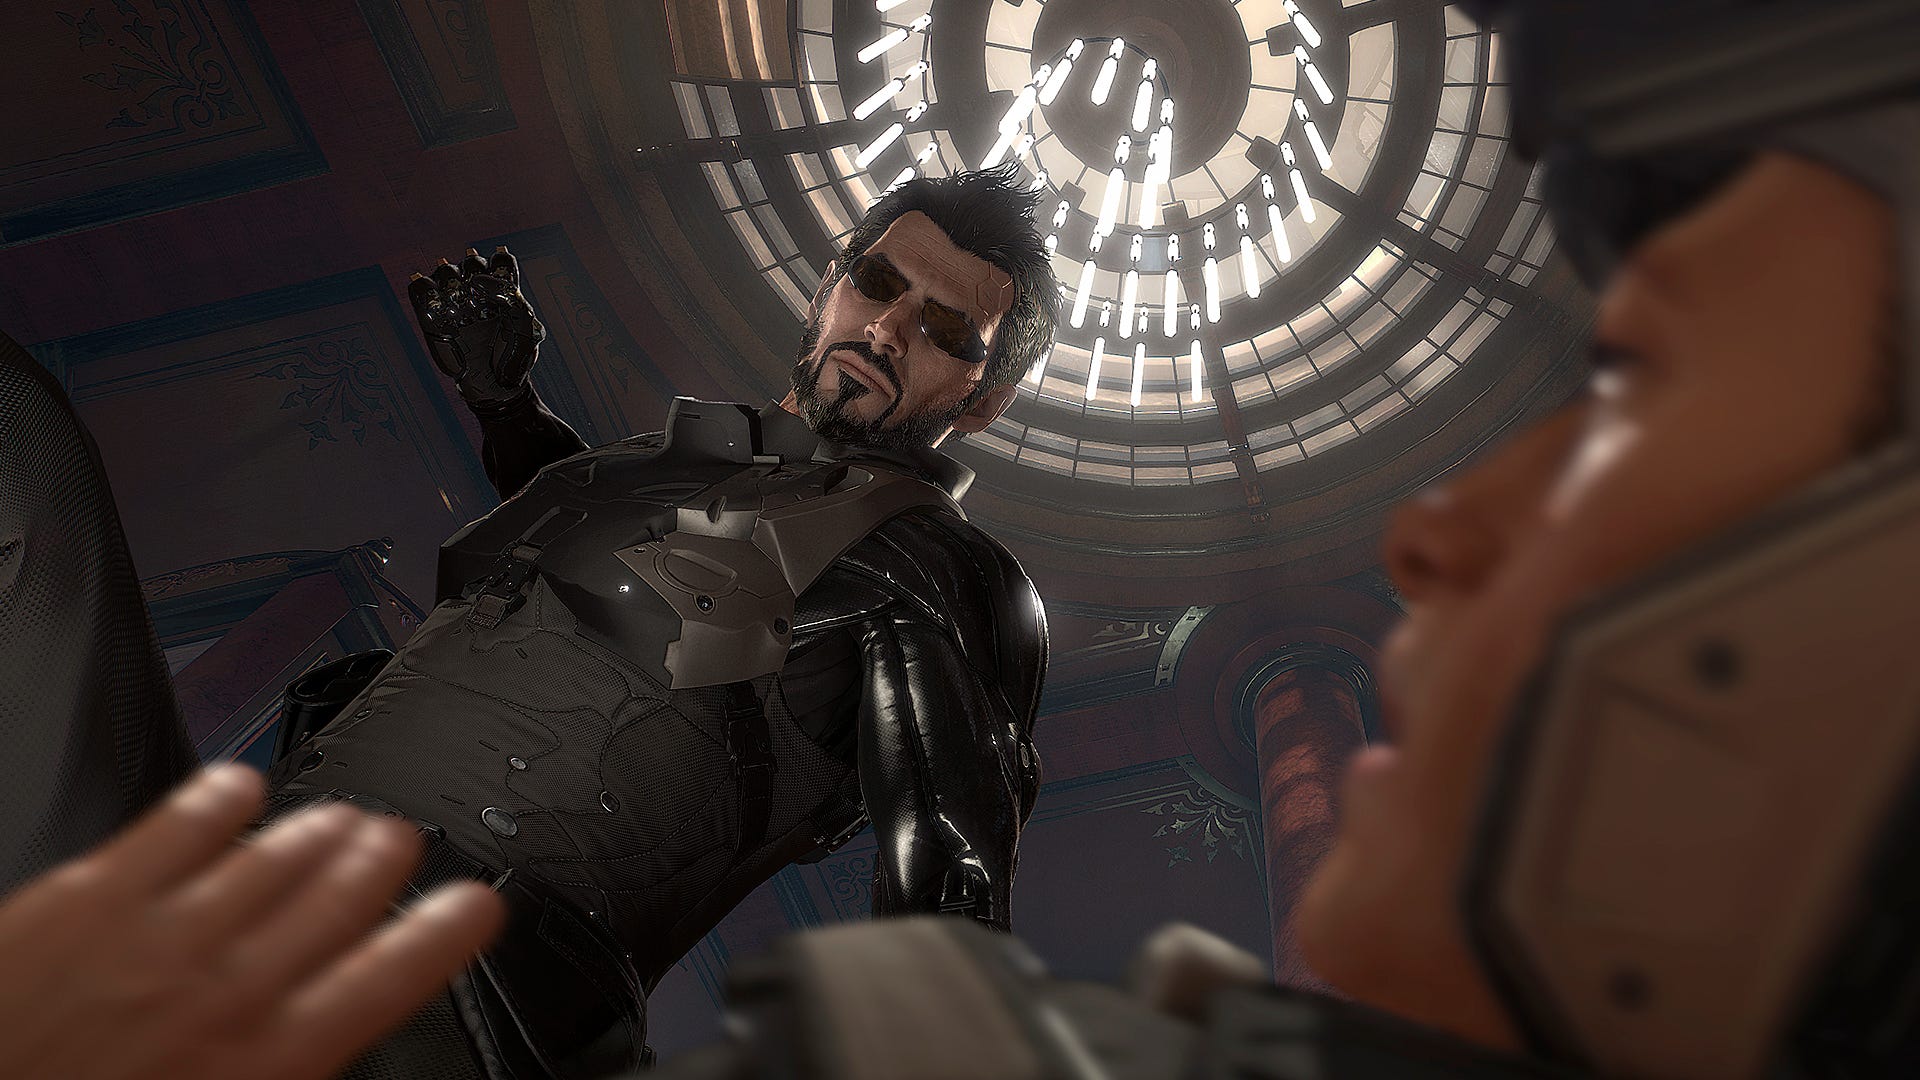 Epic’s spring sale is underway, and Deus Ex: Mankind Divided is free to keep